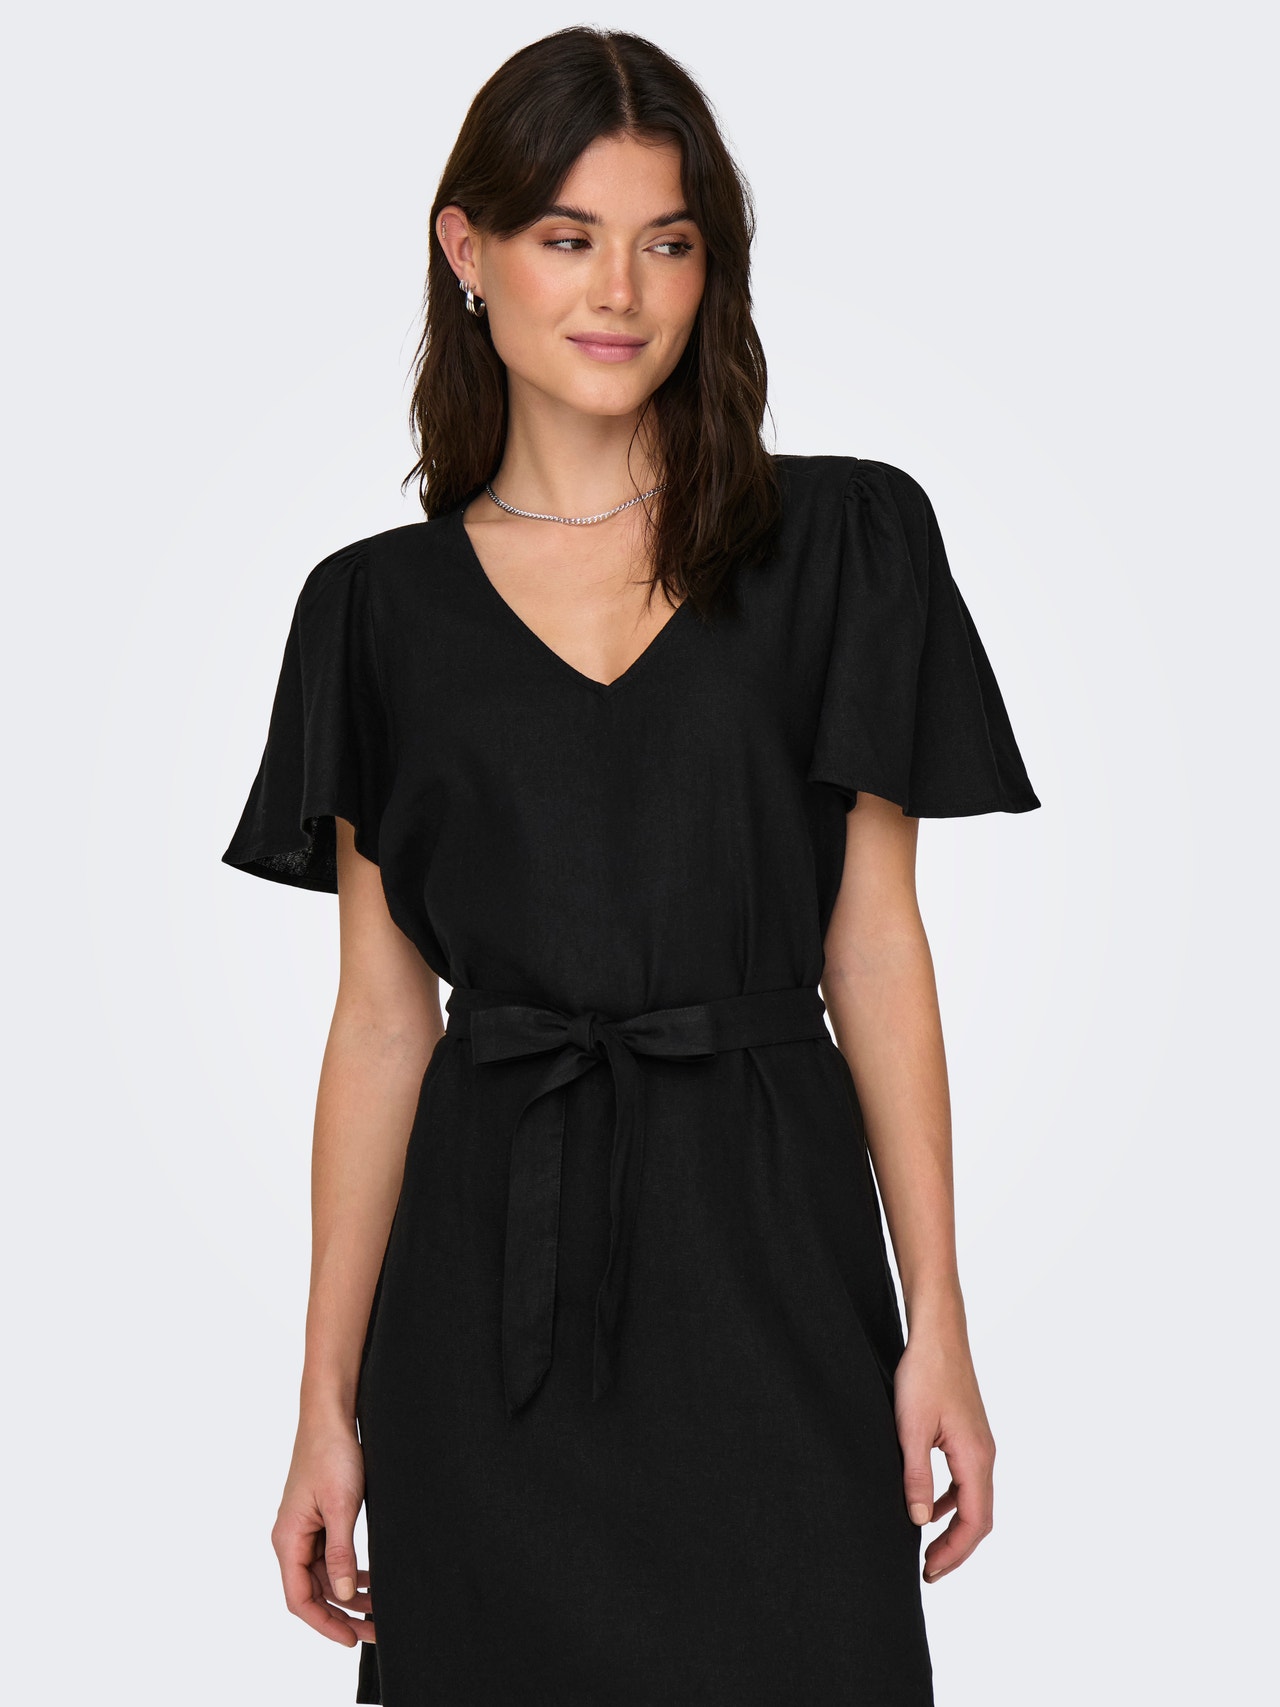 ONLY Robe courte Regular Fit Col en V Manches cloches -Black - 15321189